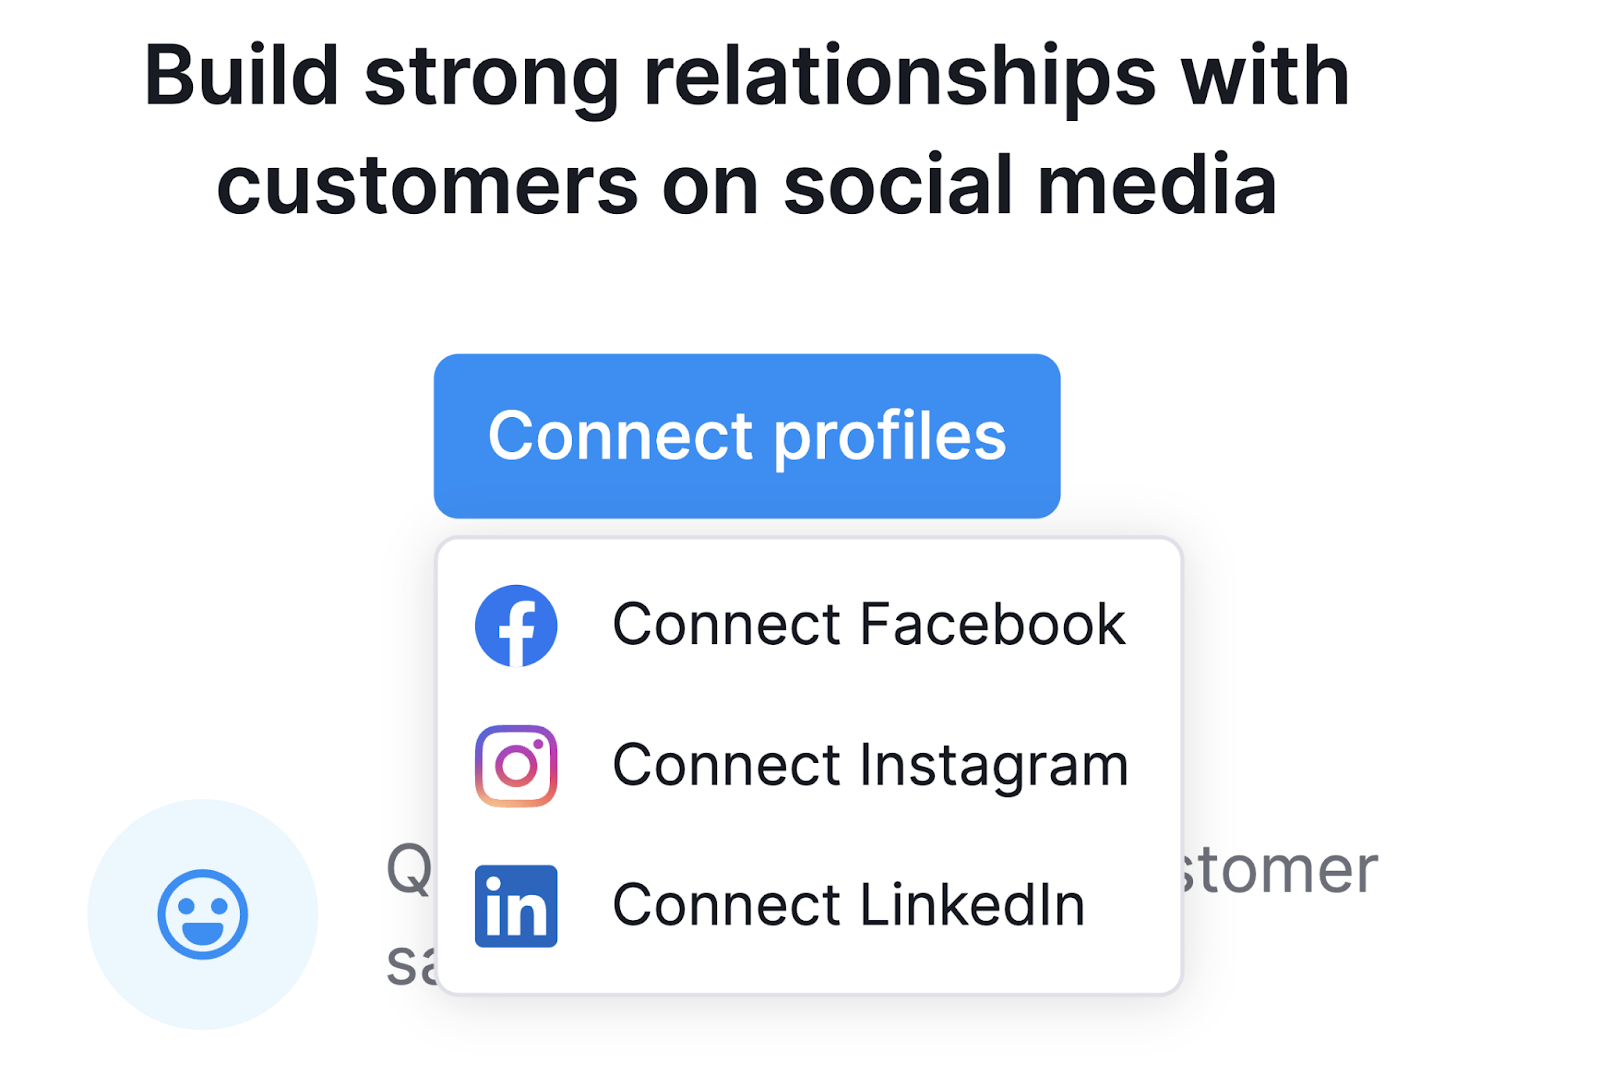 "Connect Facebook," "Connect Instagram," and "Connect LinkedIn" drop-down menu